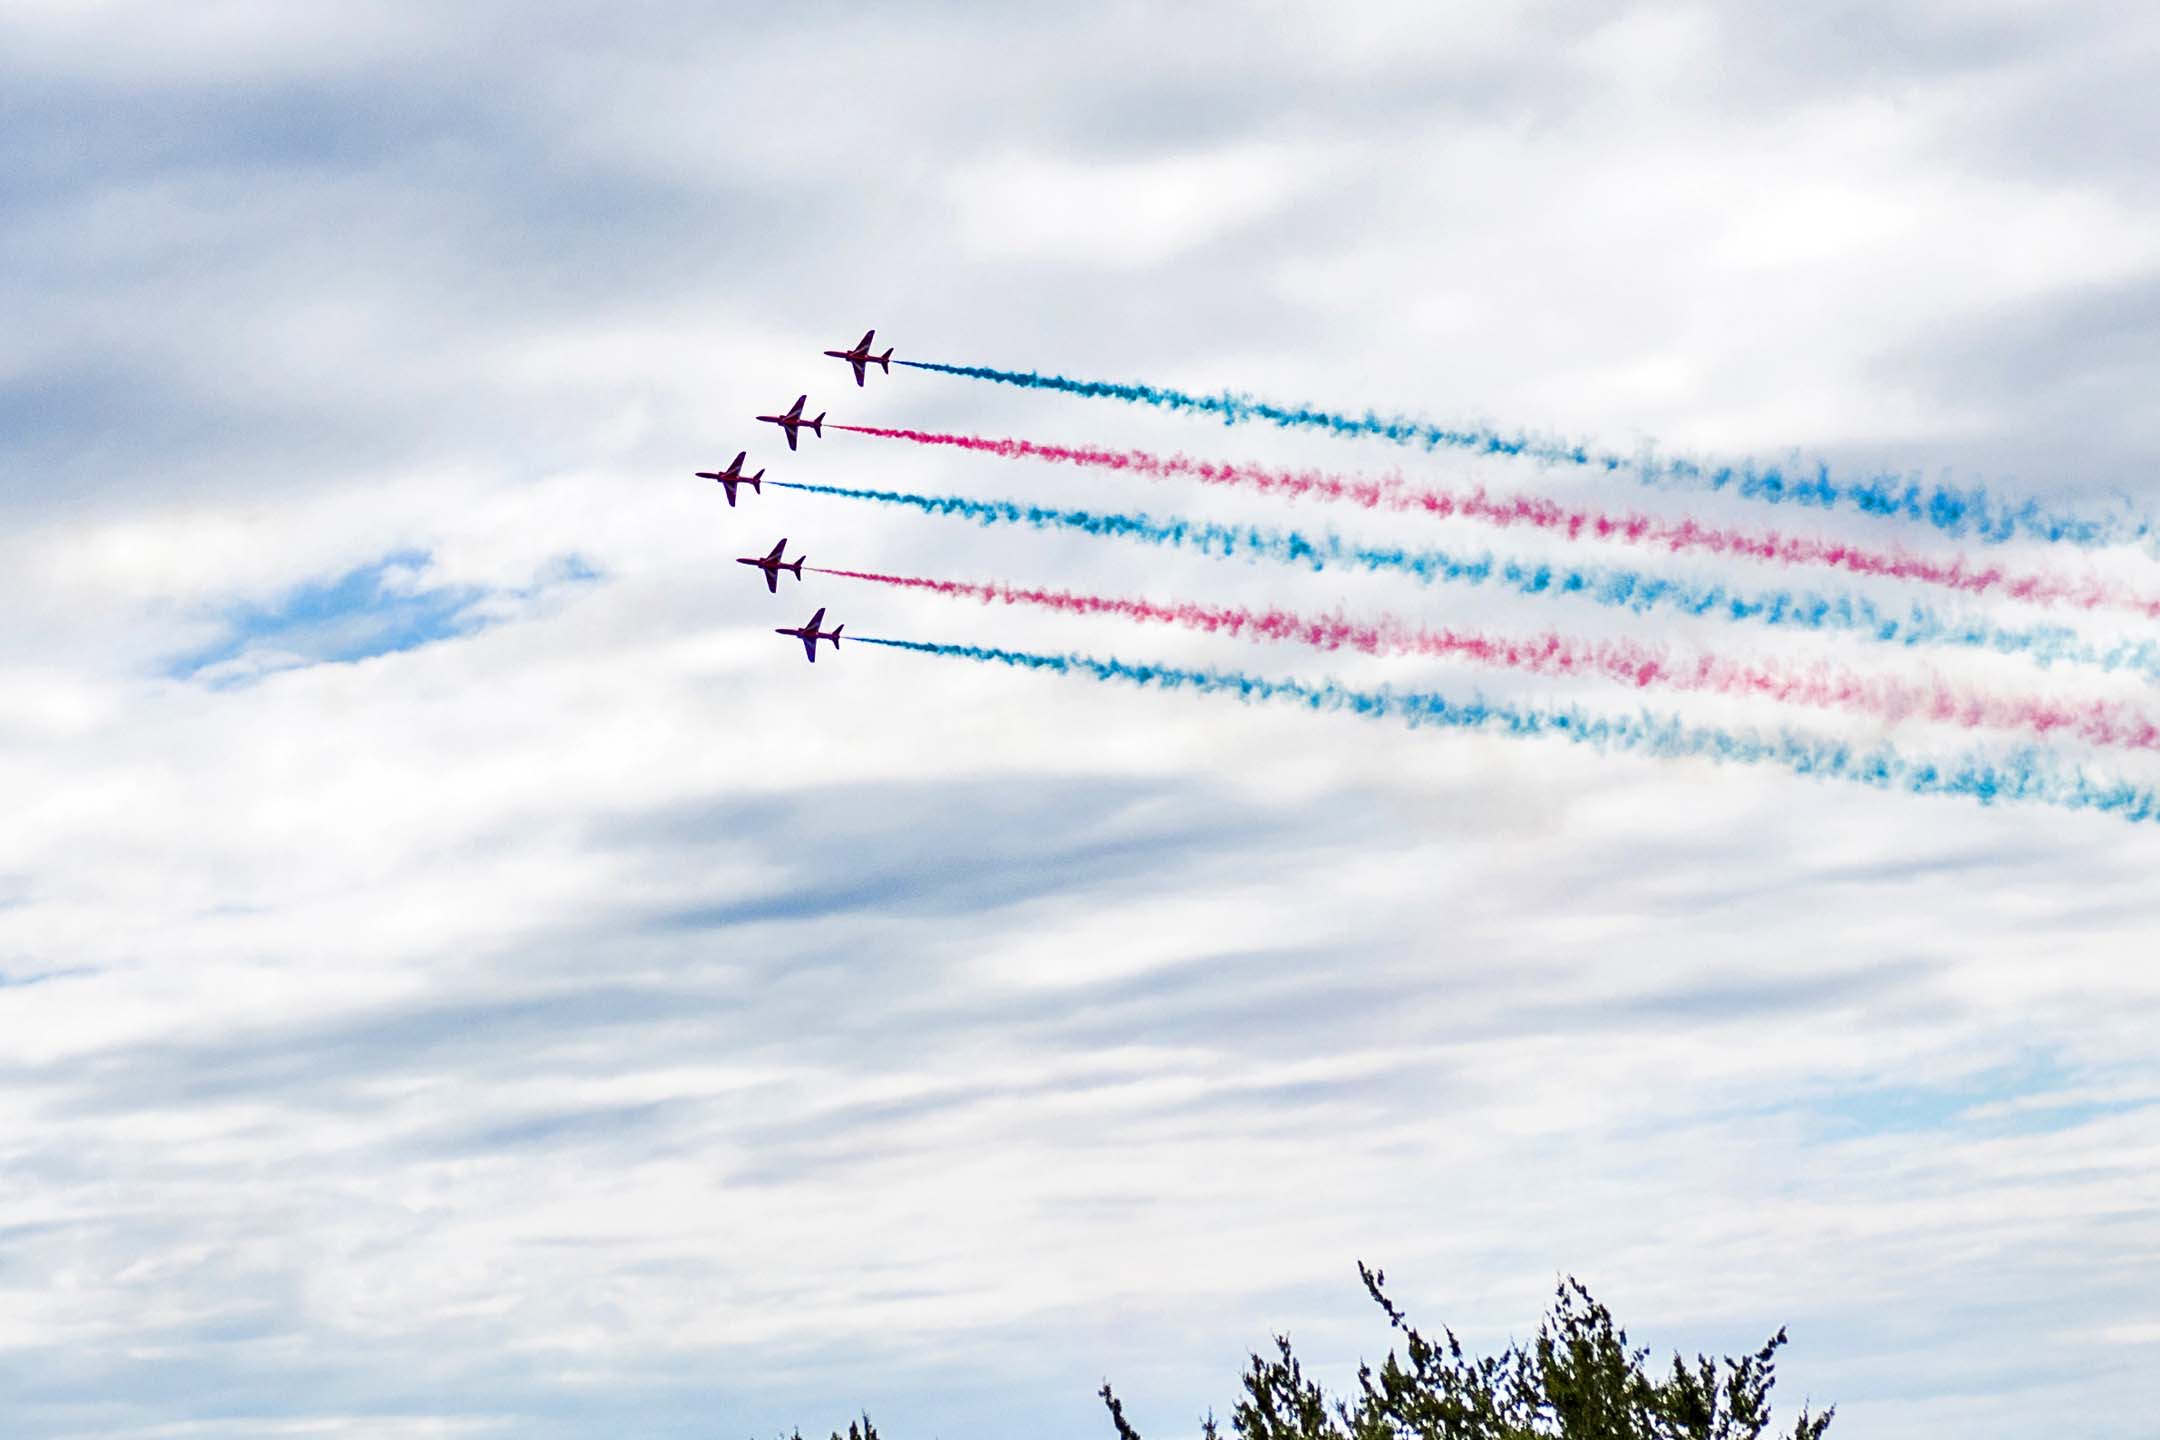 The Red Arrows acrobatic team screams overhead as the cars are marshalled back into their starting positions. Factoring in the huge amount of helicopter traffic, acrobatic displays, and the arrival of RAF Tornadoes, the Goodwood festival is also a bit of an airshow.